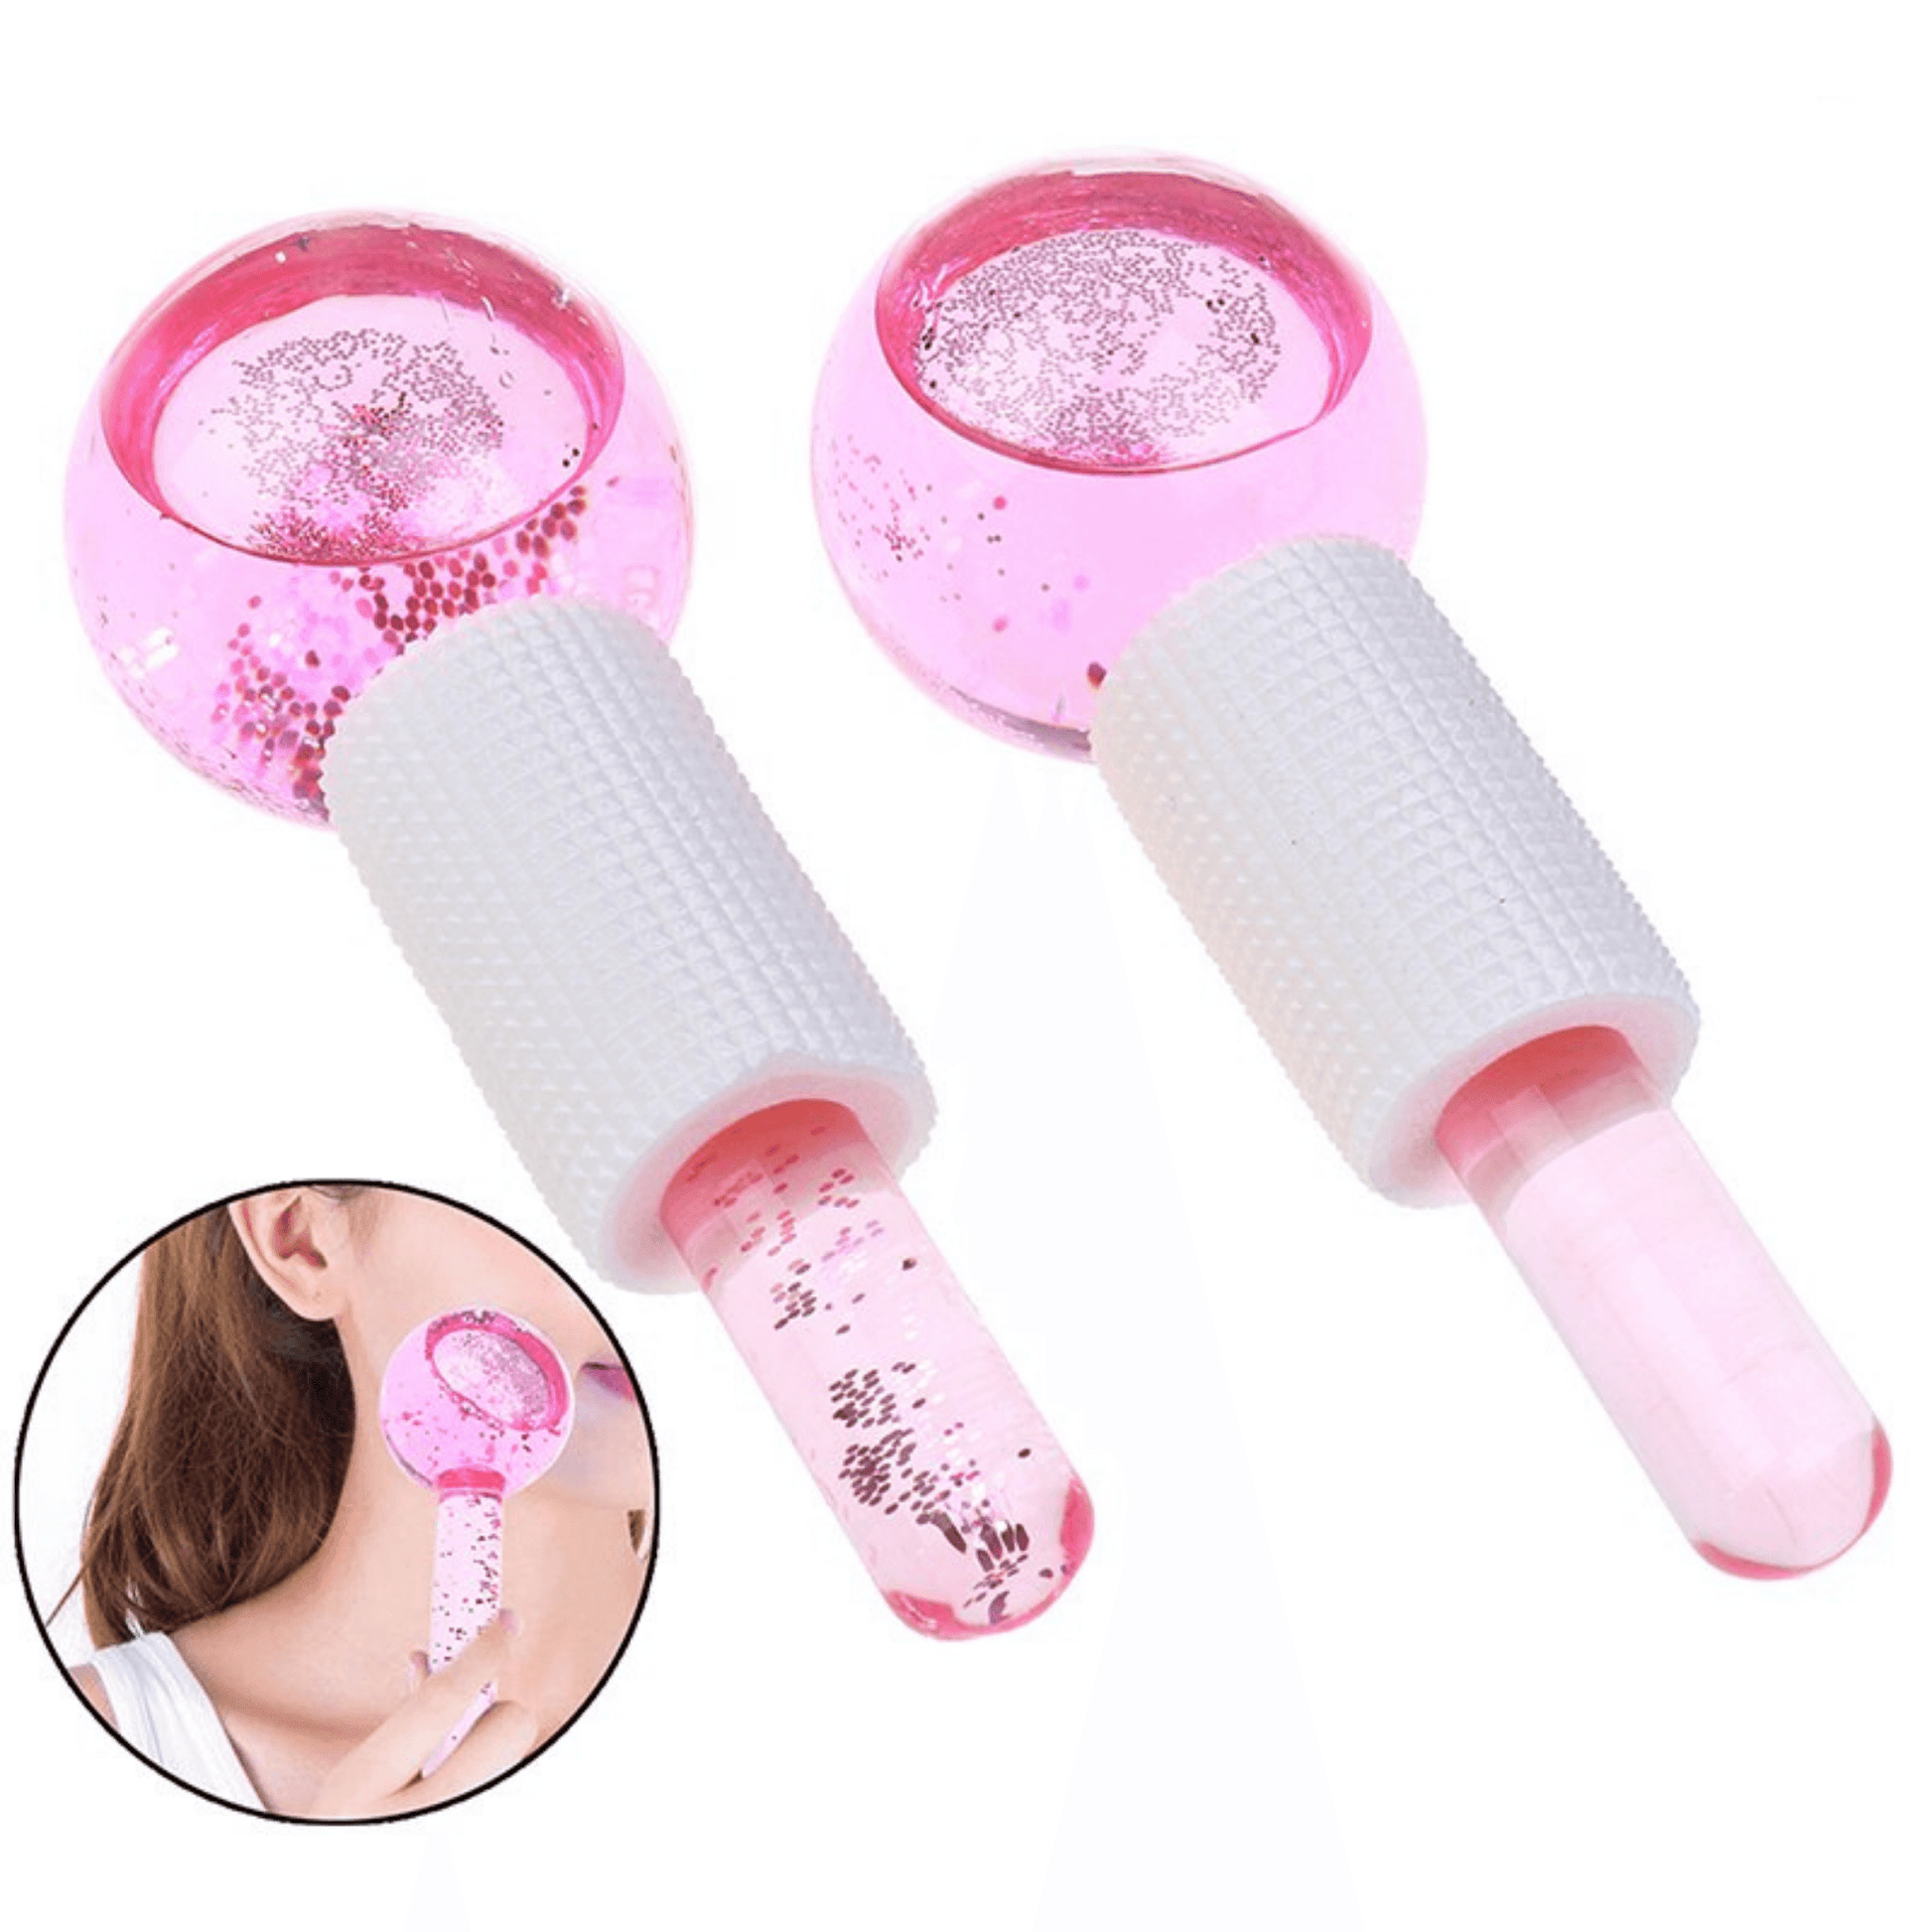 Dreambox Beauty Glow Globes [Ice Roller For Face] 1 SET